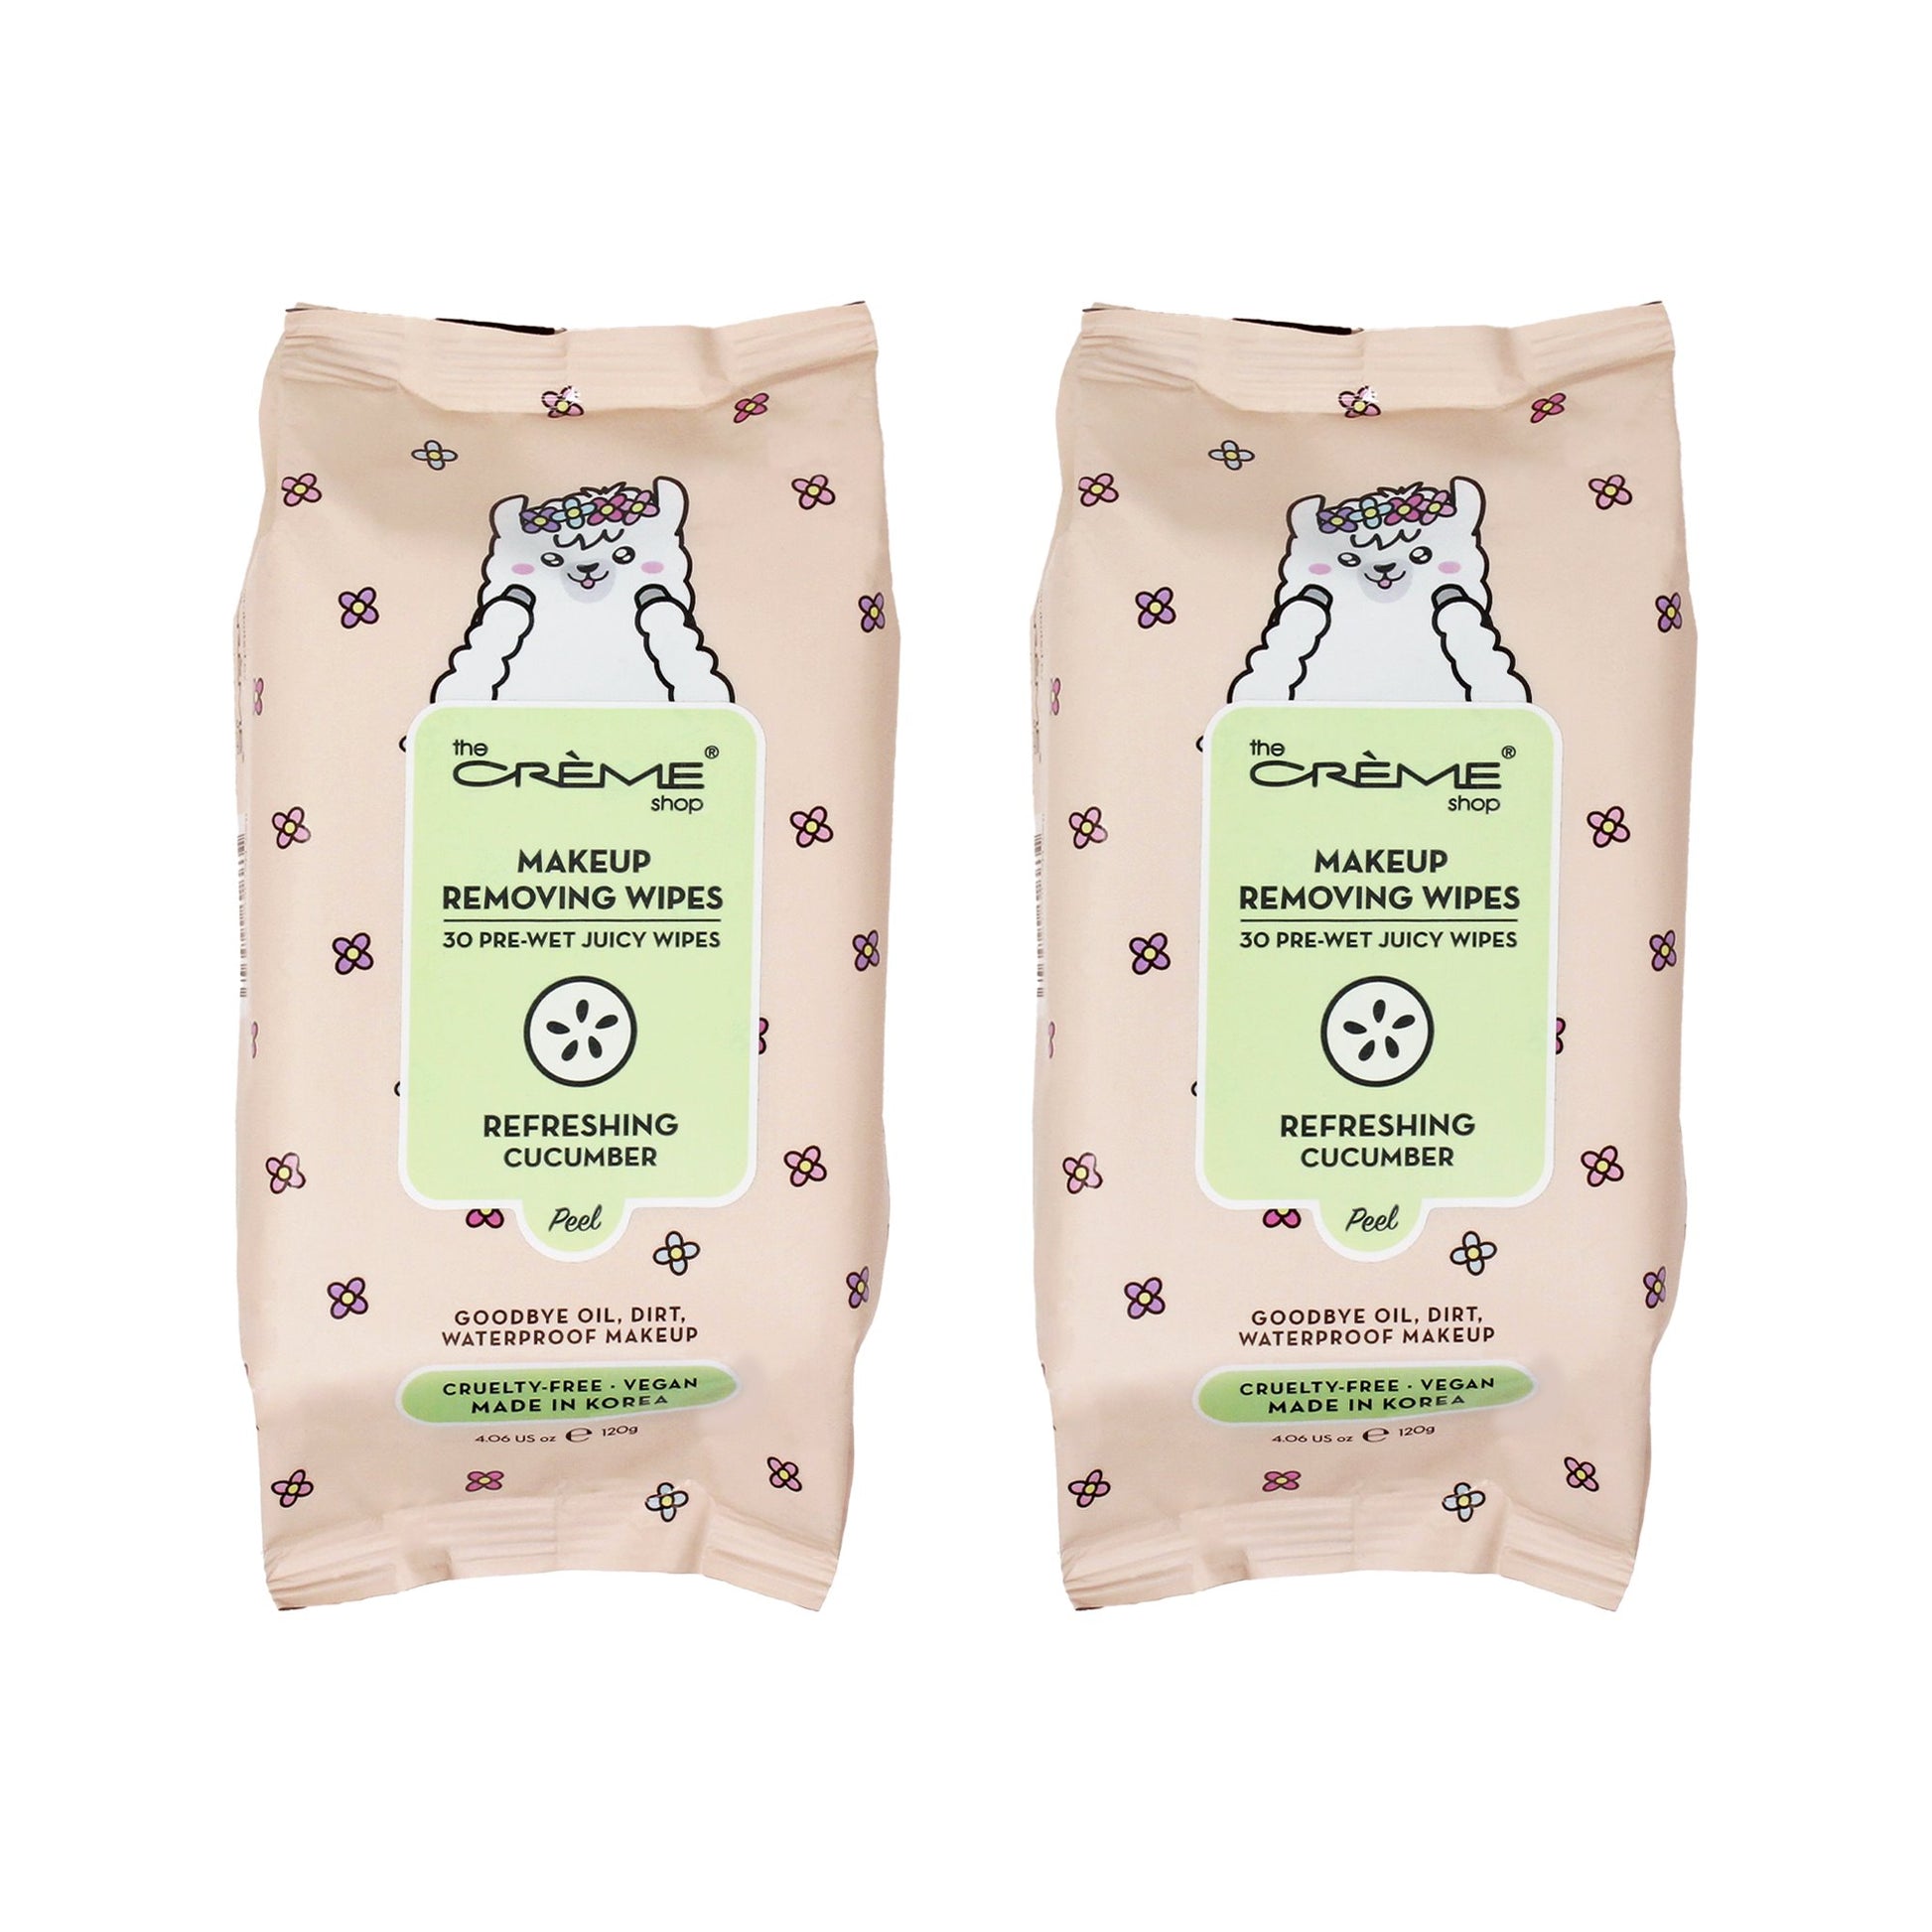 Llama Juicy Makeup Removing Wipes - (2 Packs of 30) towelettes The Crème Shop 